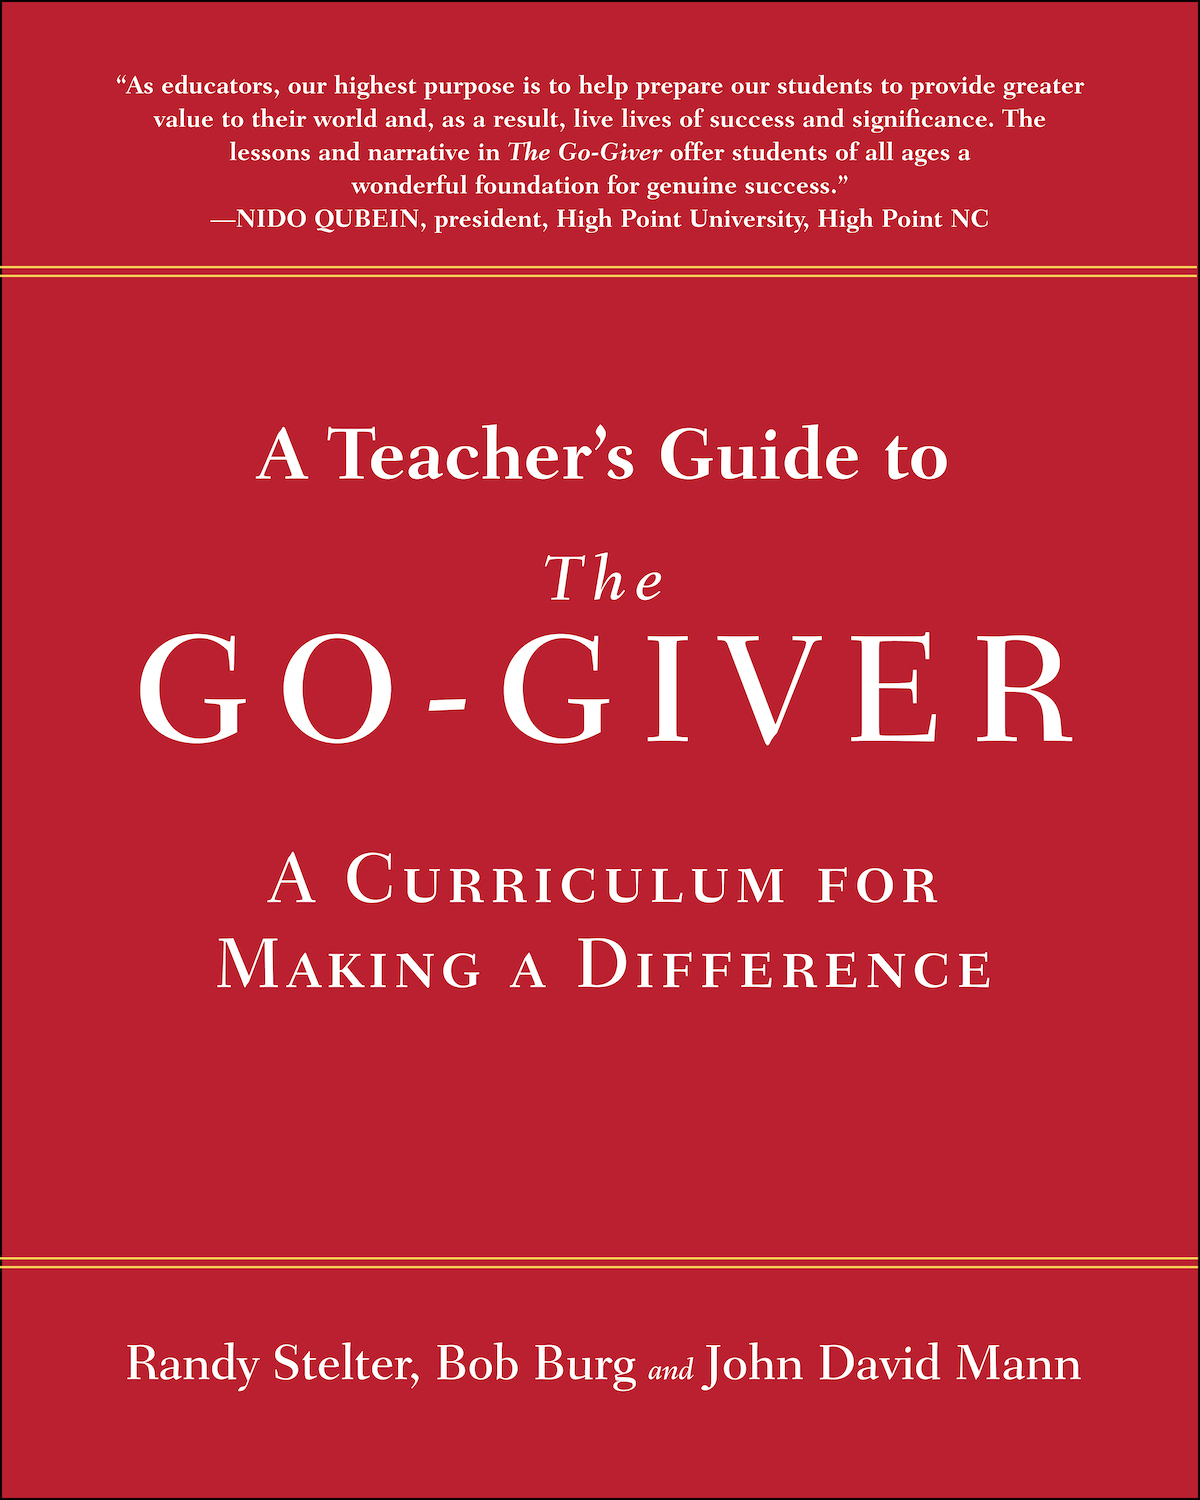 A Teachers Guide to The Go-Giver